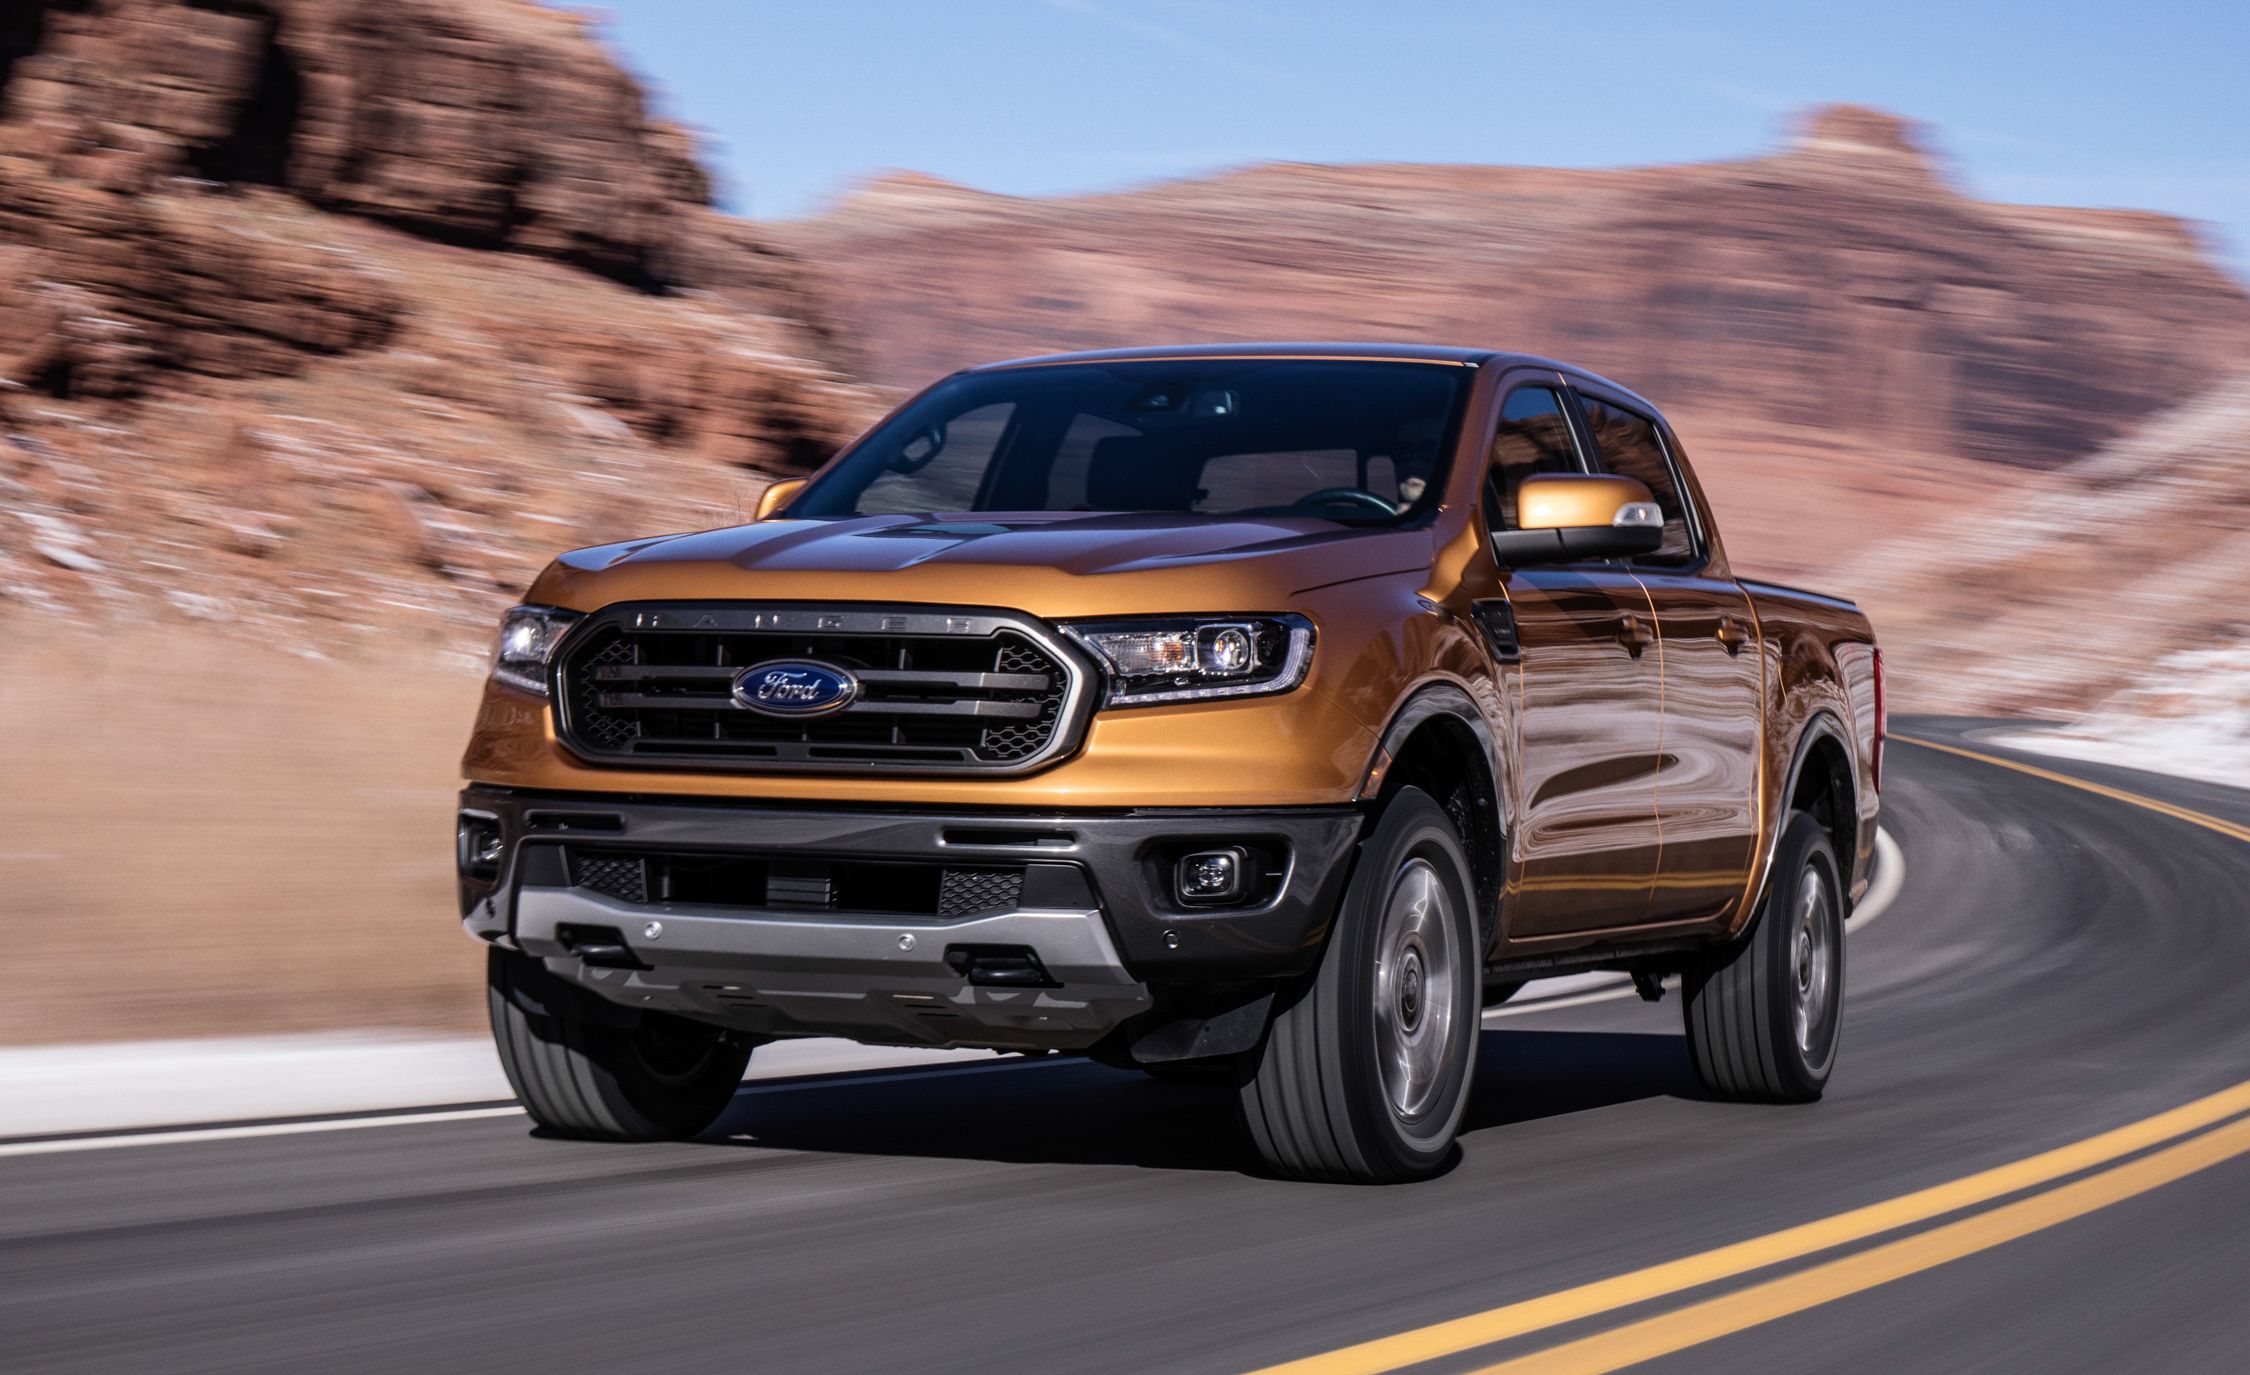 The 2019 Ford Ranger is Ready to be Equipped - Emkay